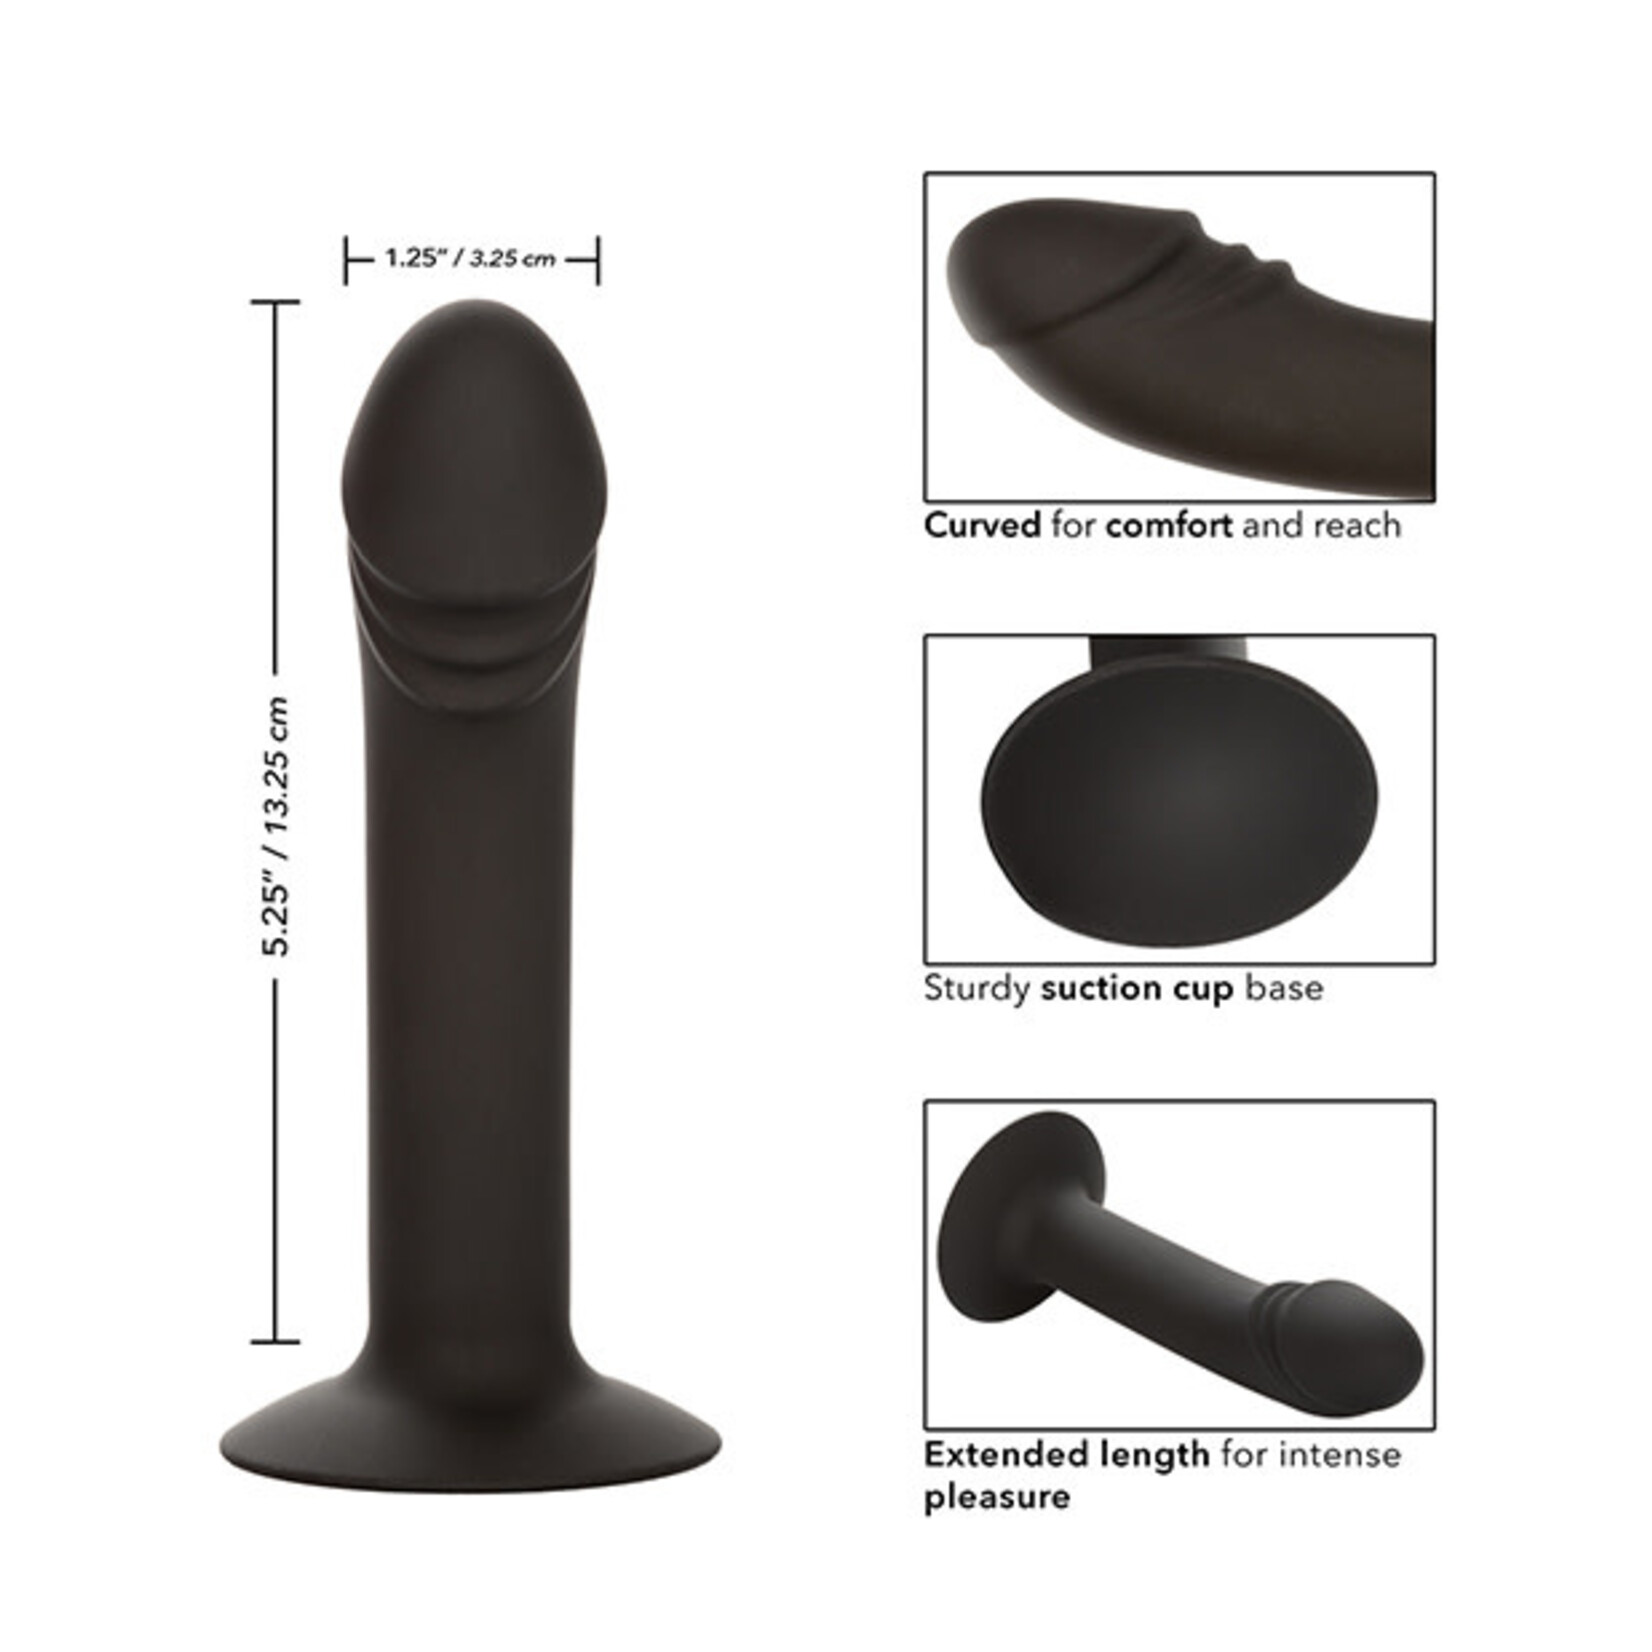 CALEXOTICS SILICONE CURVED ANAL STUD